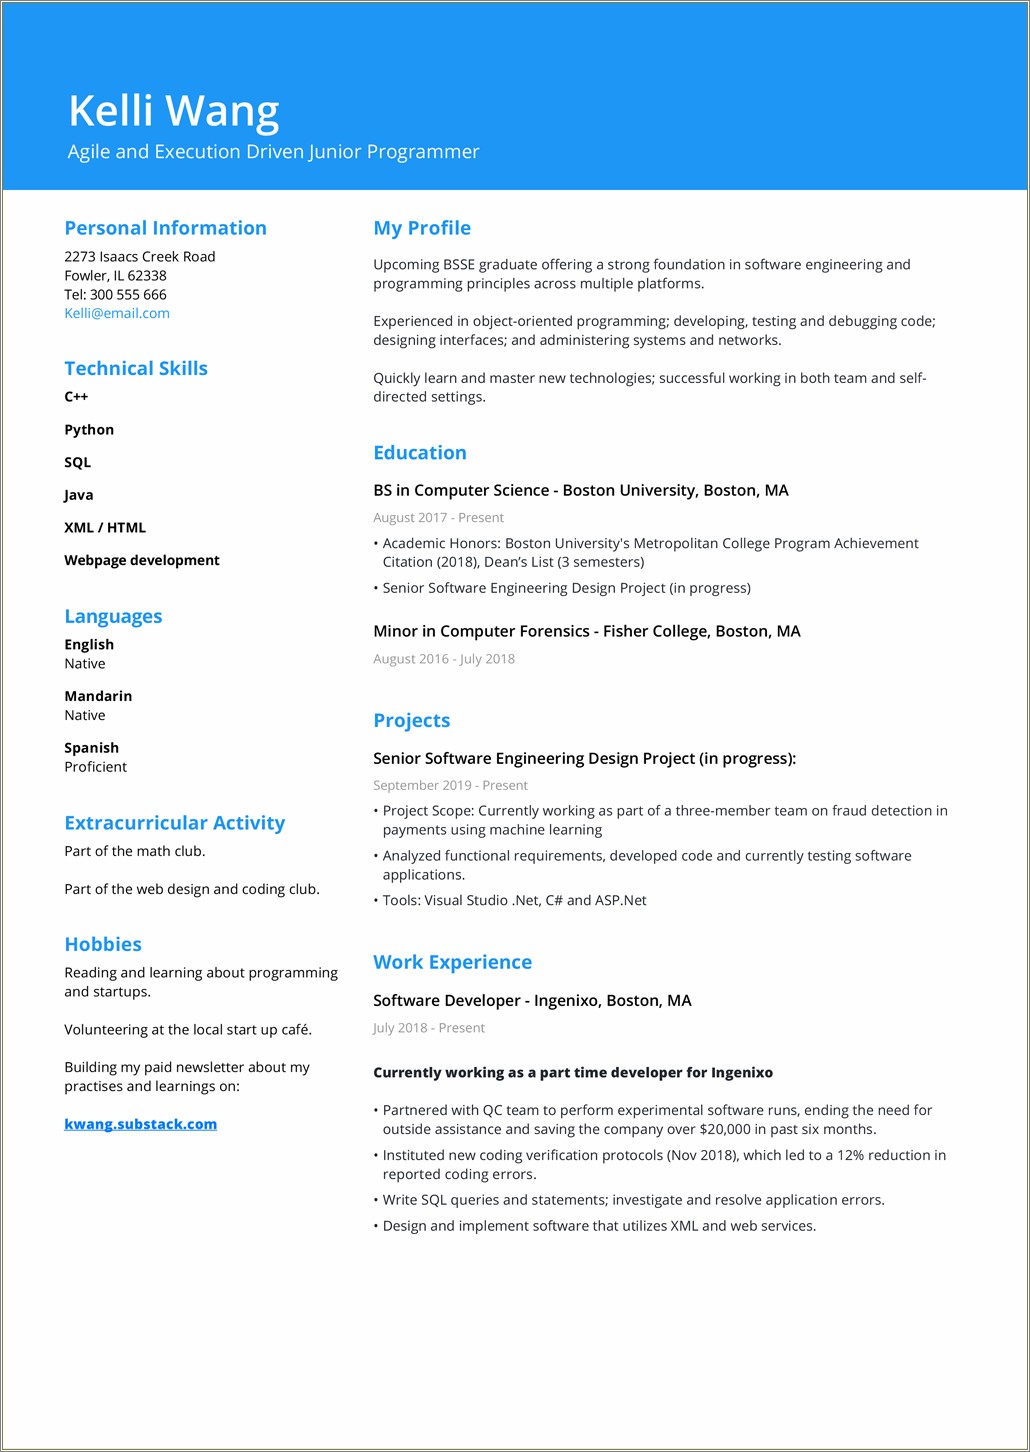 Resume Templates That Work With Job Search Programs